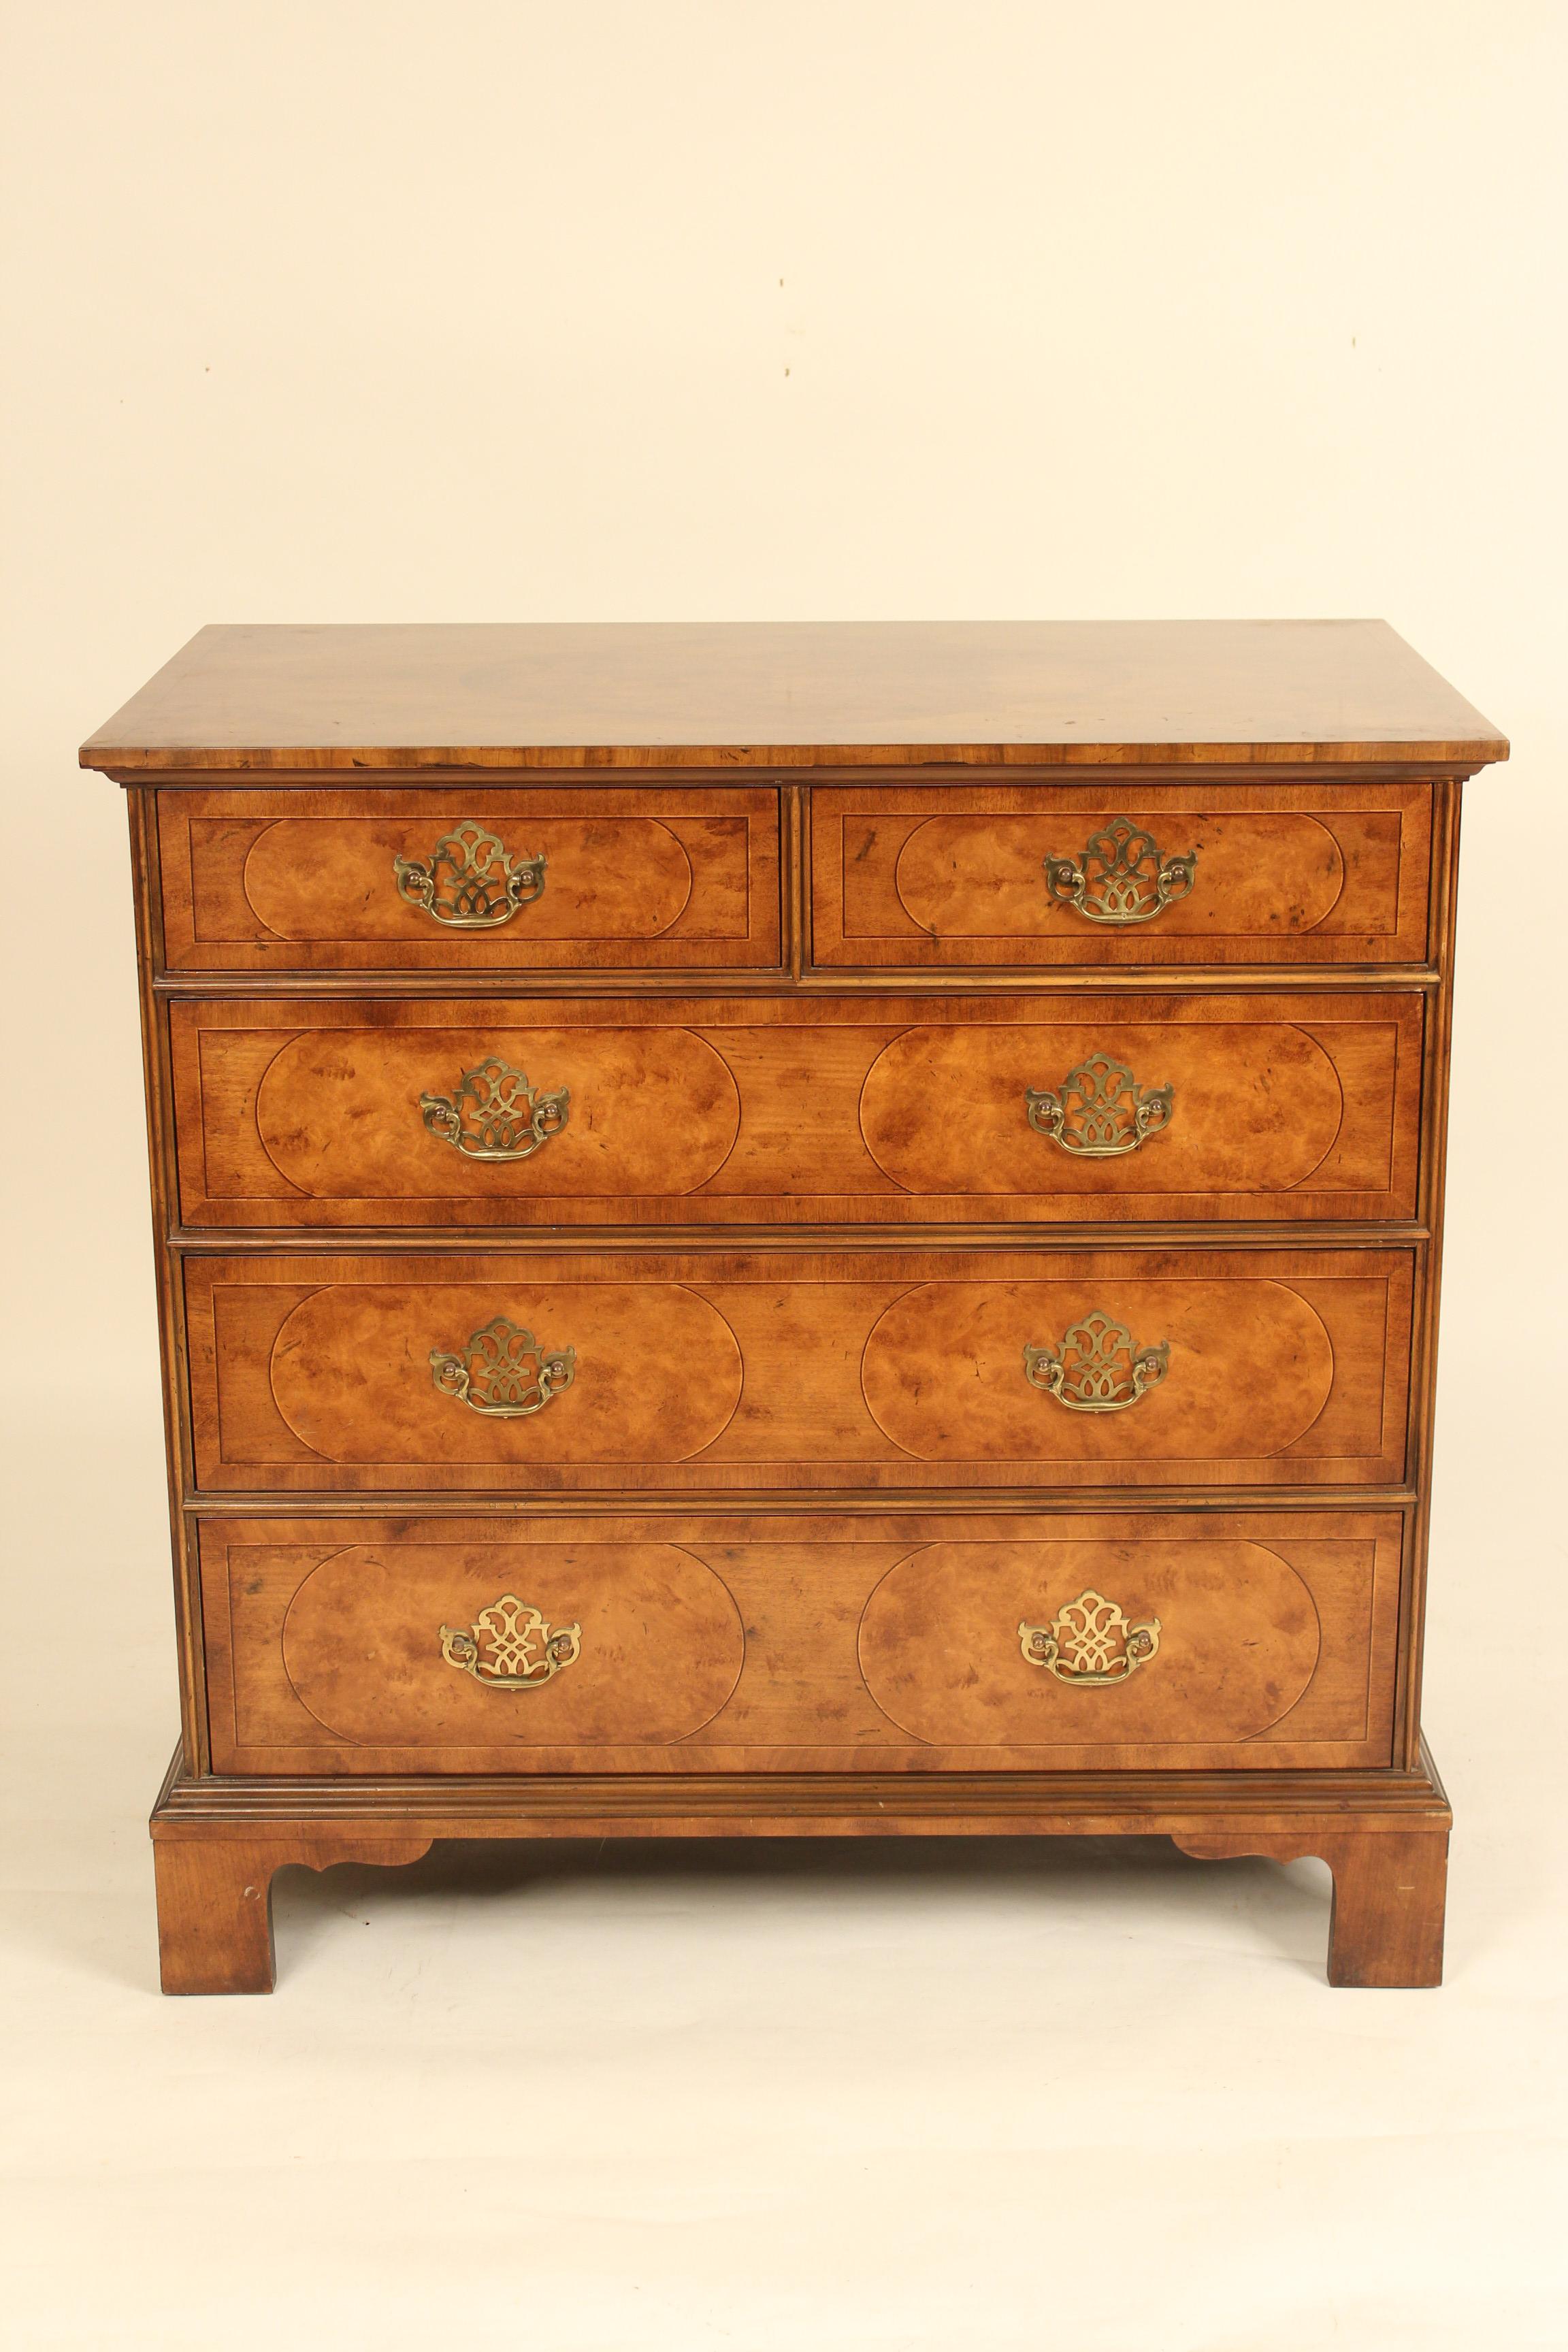 Queen Anne style burl walnut and walnut chest of drawers, made by Baker Furniture, circa 1990. A plaque in the upper right drawer indicates that this is part of the 